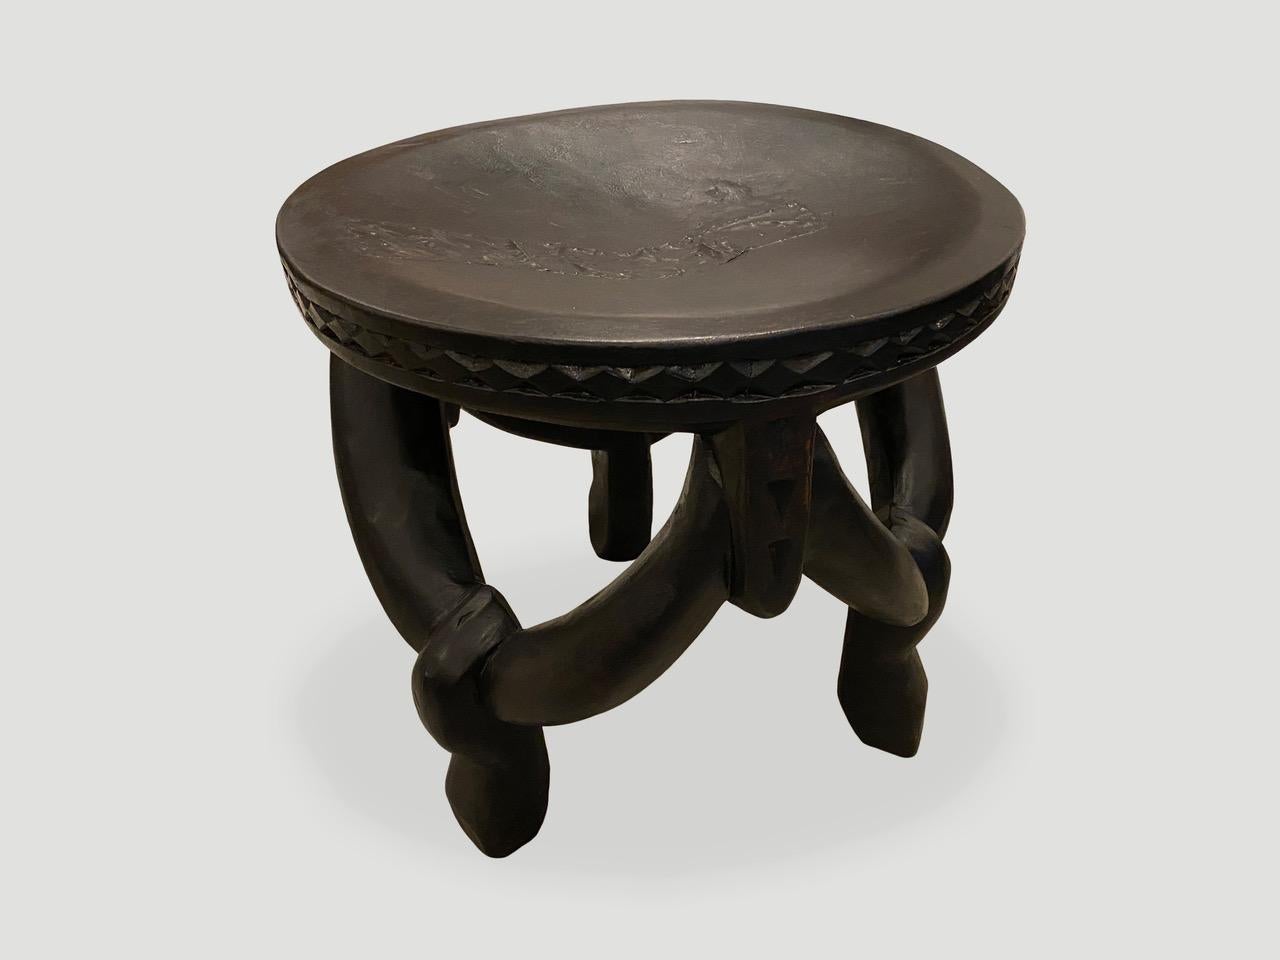 Wood Andrianna Shamaris Tanzanian Antique Sculptural Side Table or Stool